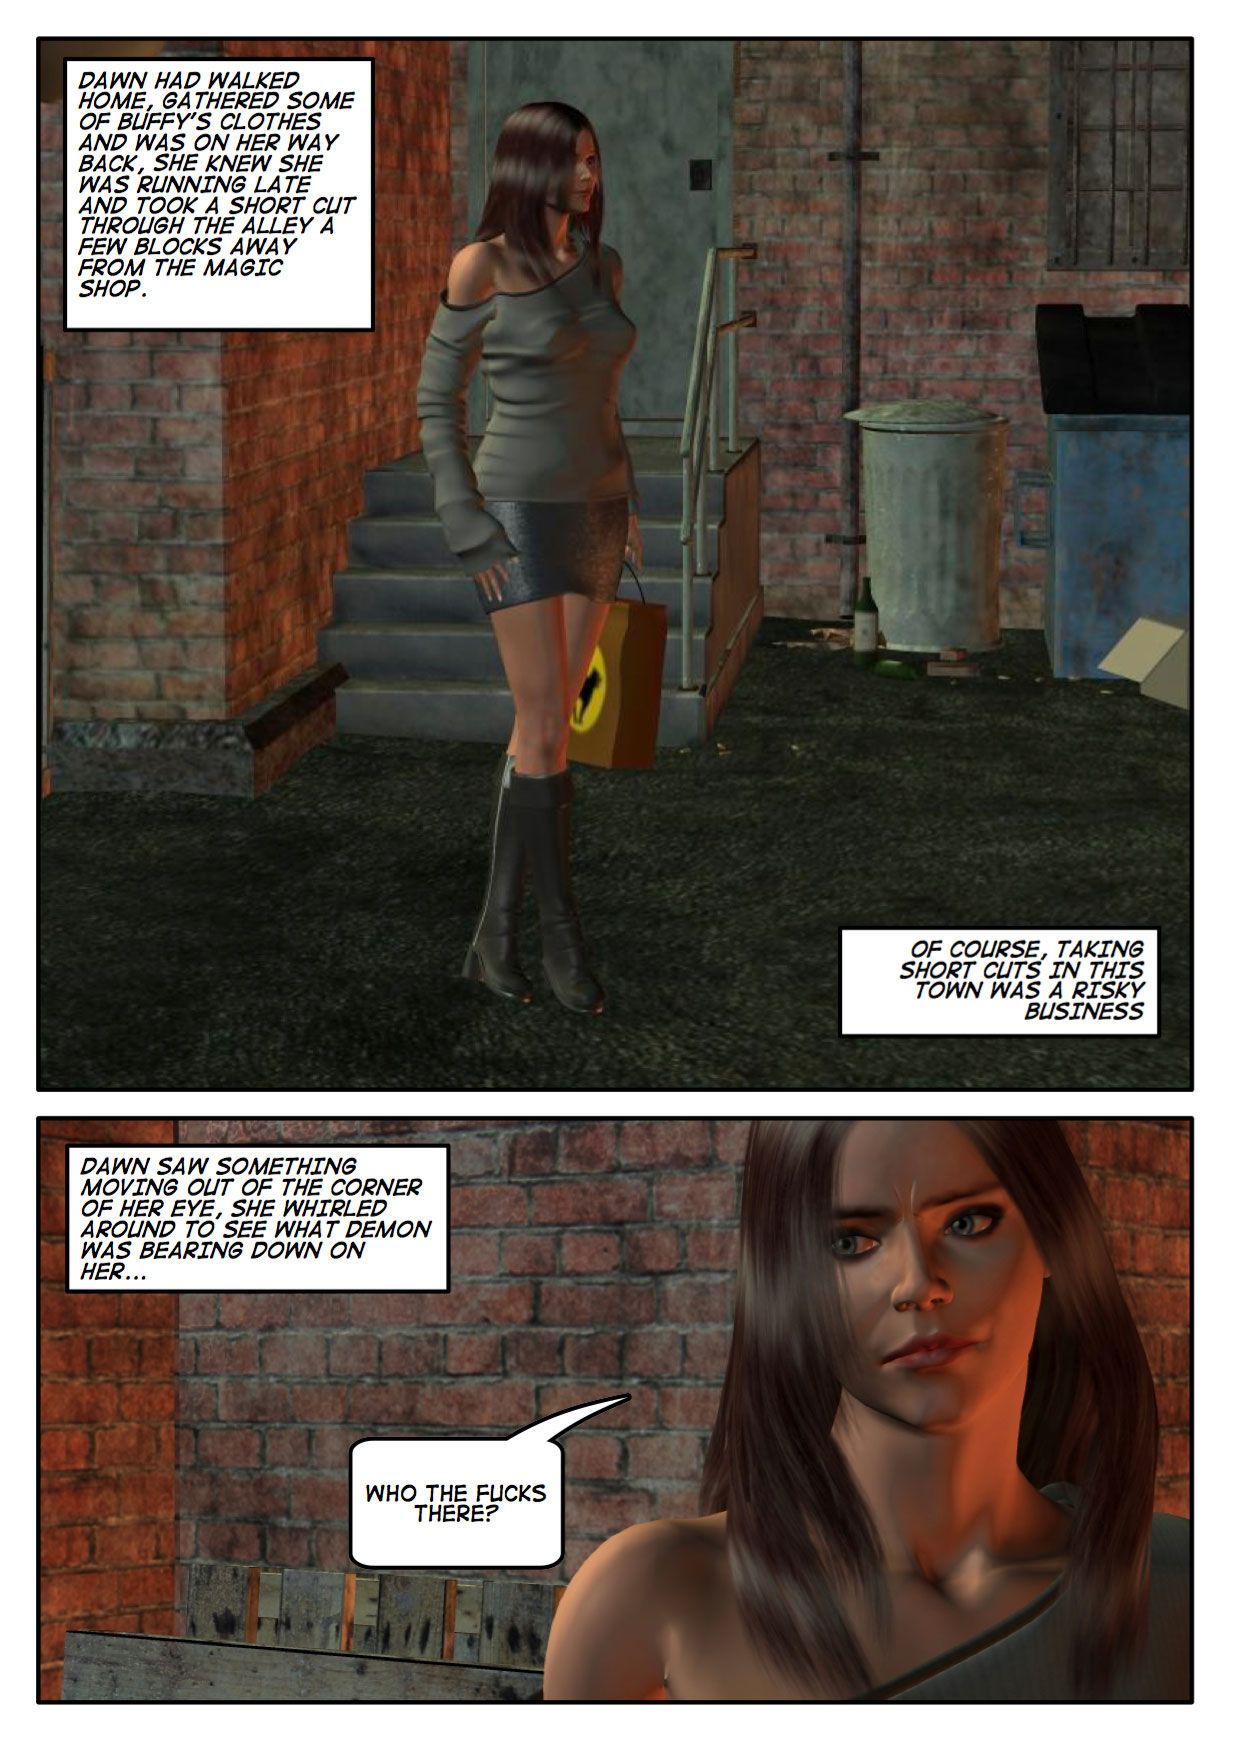 Slayer Issue 14 - part 3